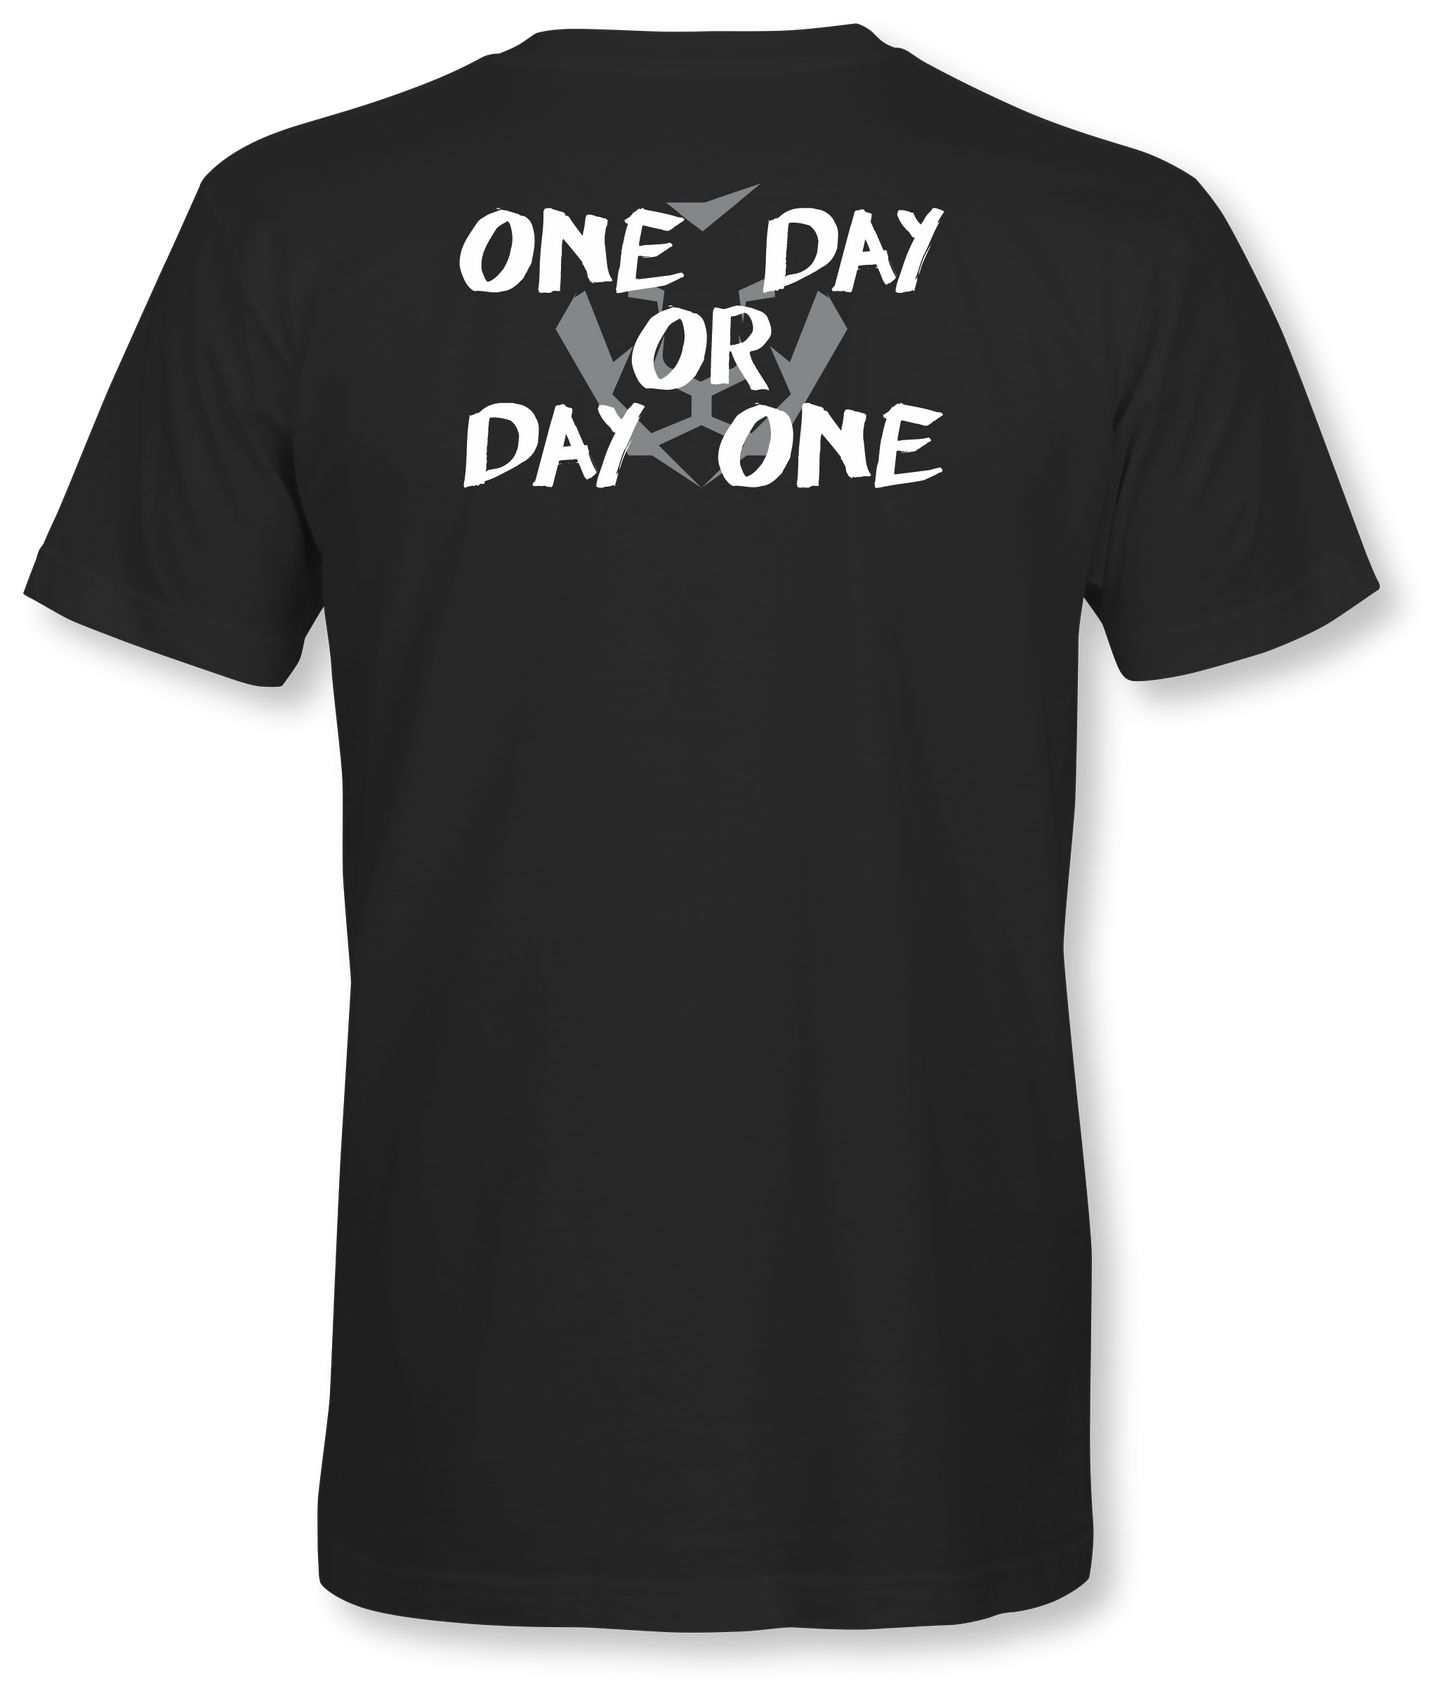 One Day or Day One